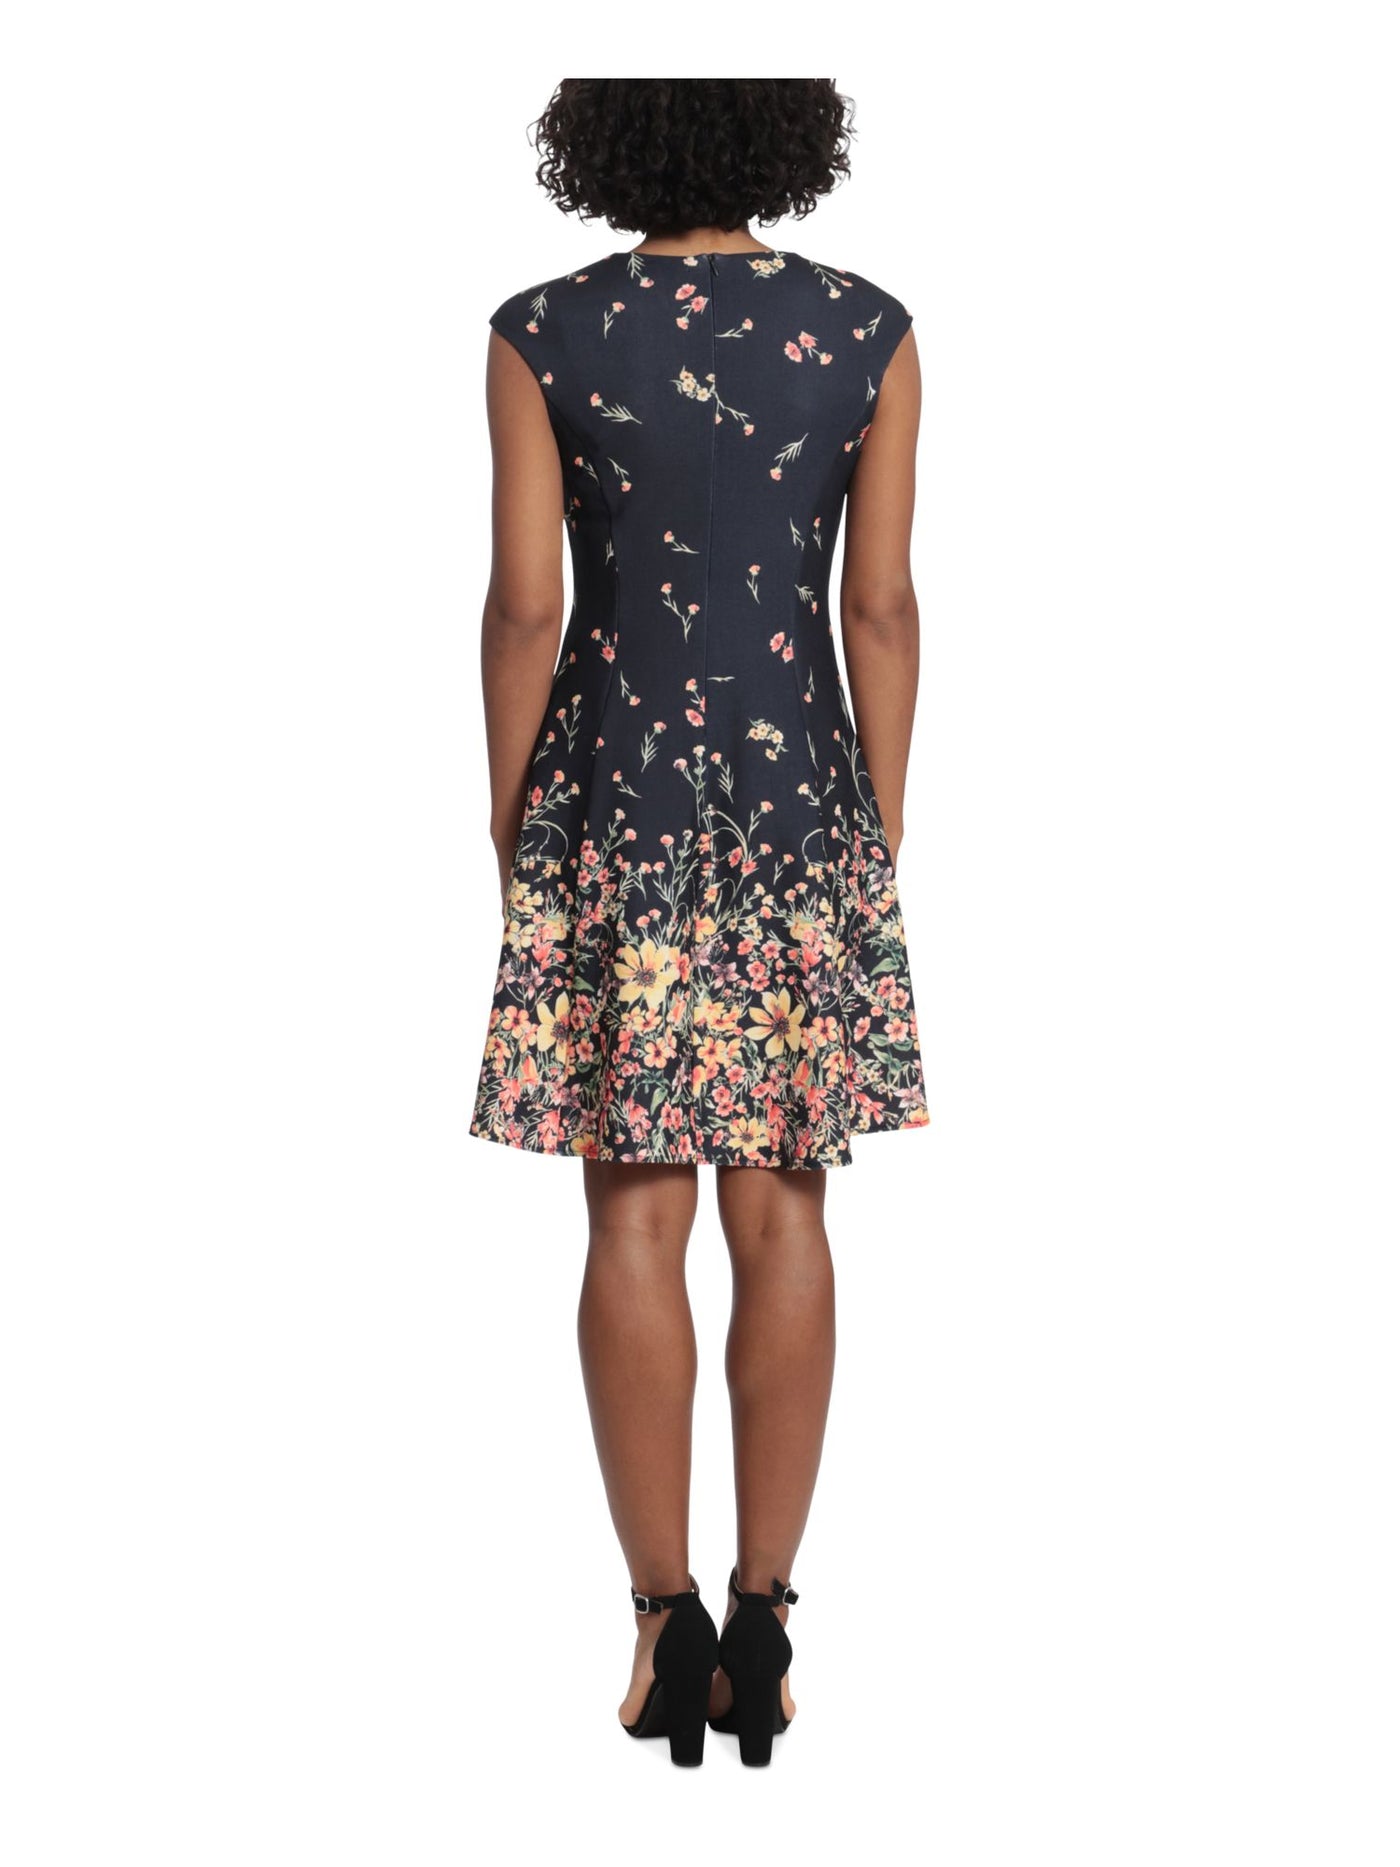 LONDON TIMES PETITES Womens Black Zippered Floral Cap Sleeve Round Neck Above The Knee Fit + Flare Dress Petites 6P